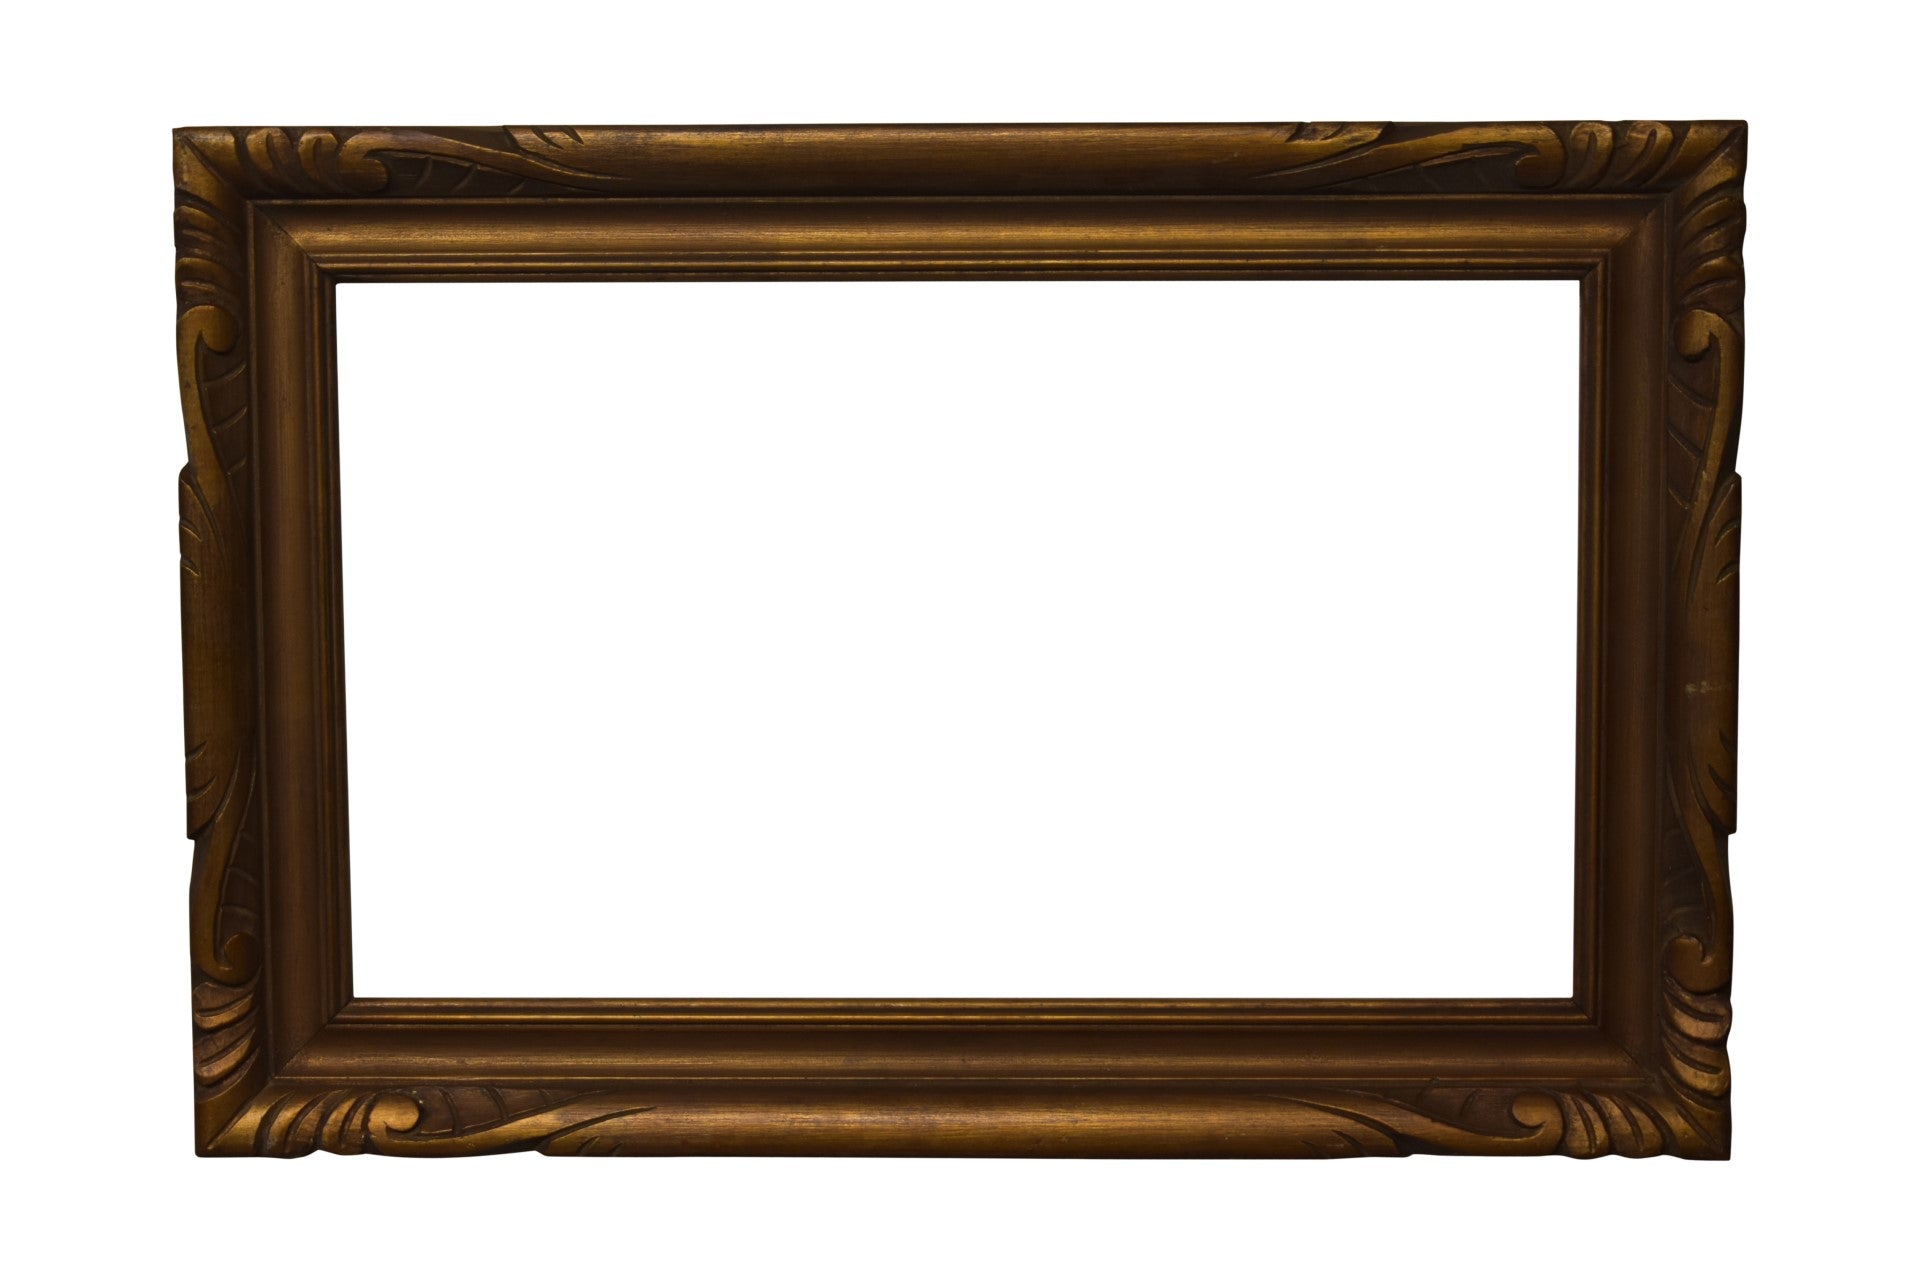 12x20 inch Vintage Gold Arts and Crafts Picture Frame For Canvas Art circa 1900s (20th Century American painting frame for sale).